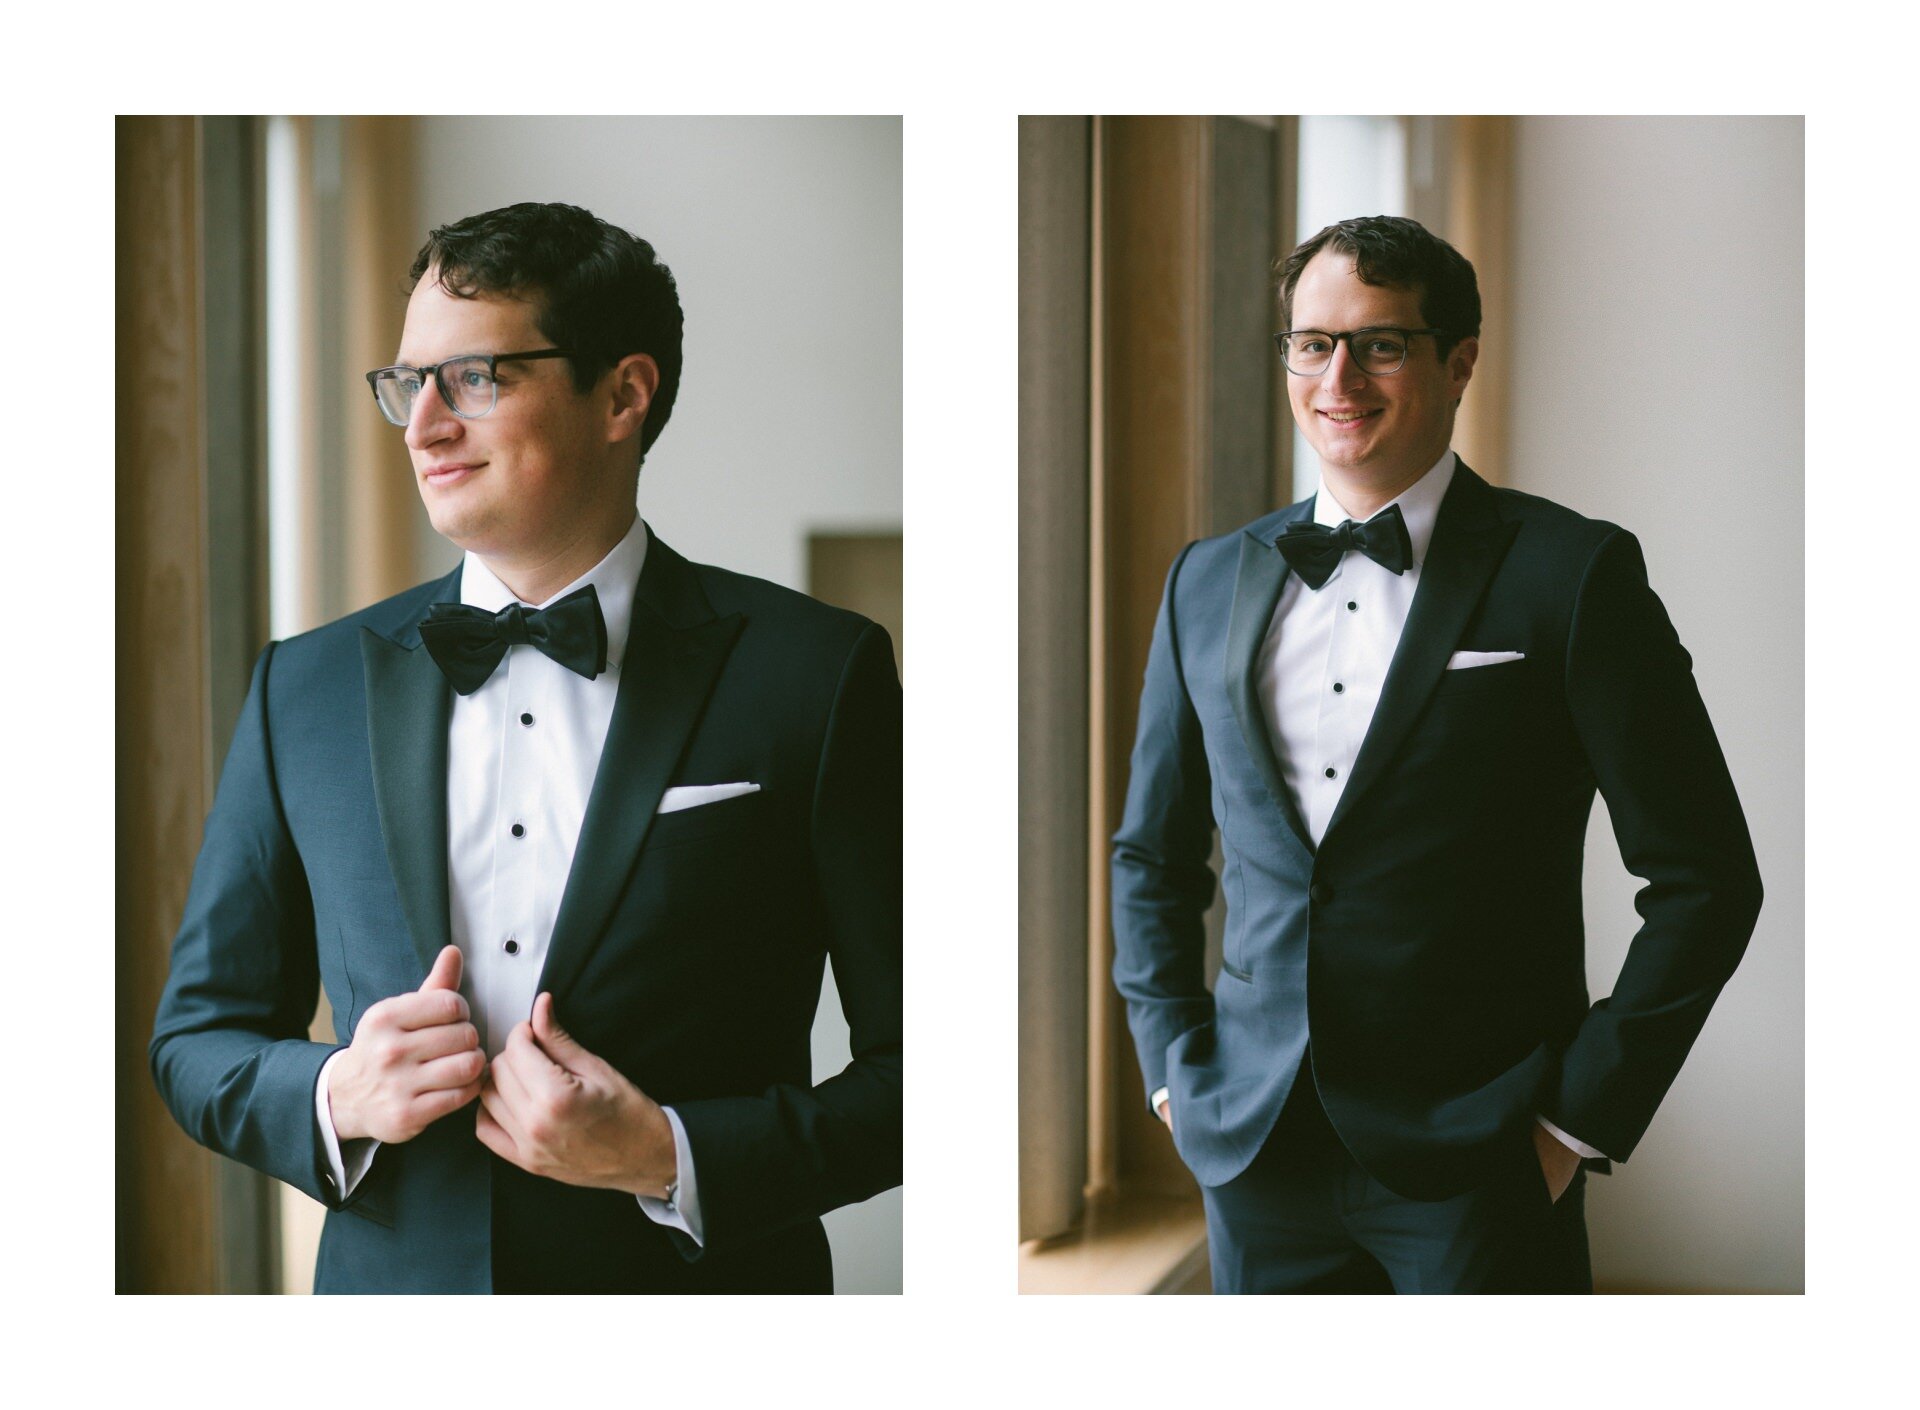 Downtown Cleveland Wedding Photographer at the Ritz 1 8.jpg